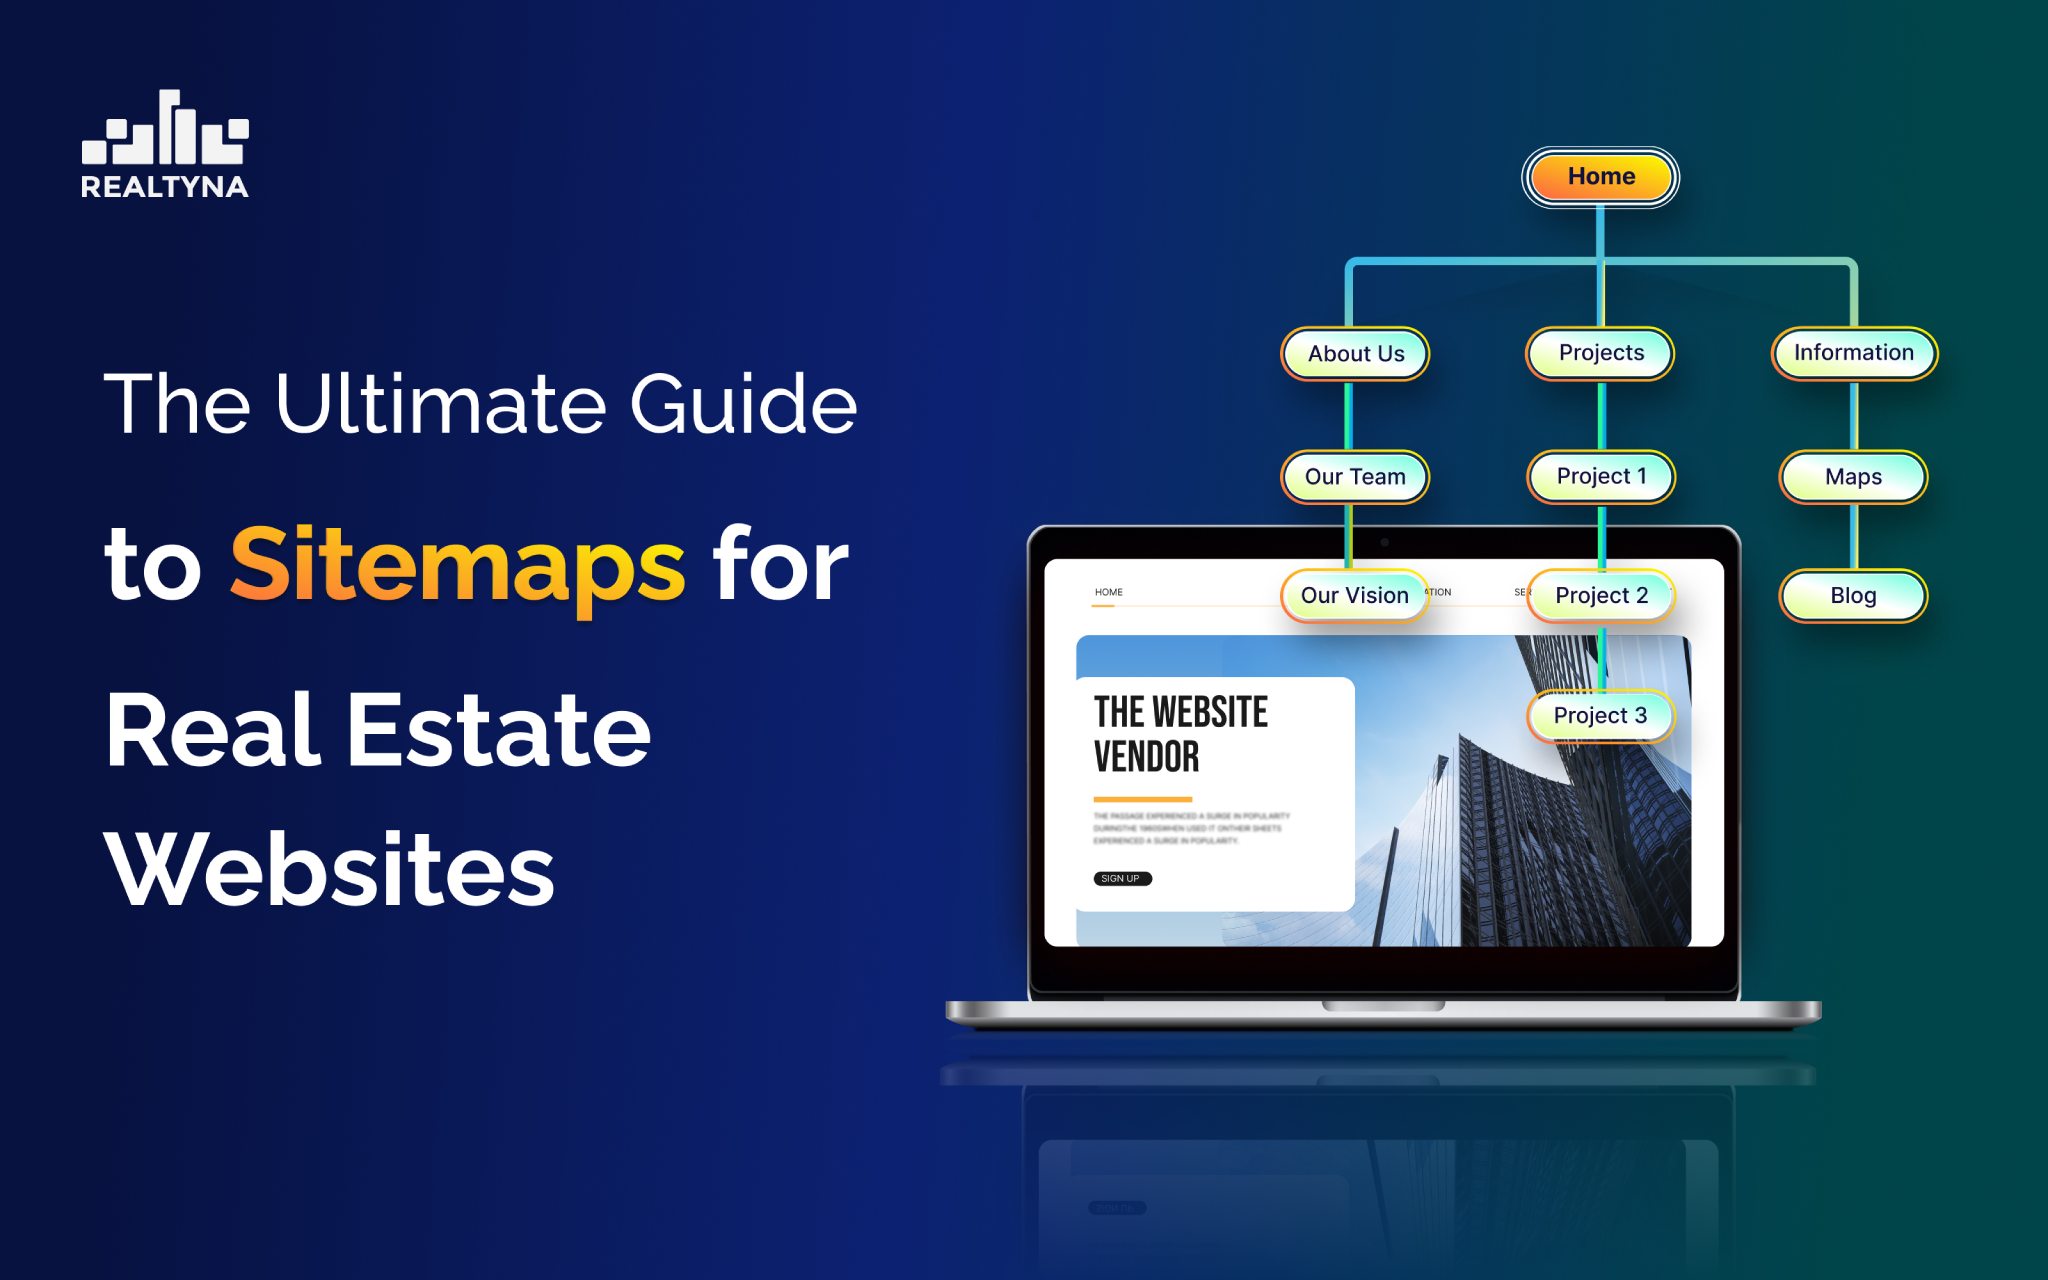 The Ultimate Guide to Sitemaps for Real Estate Websites